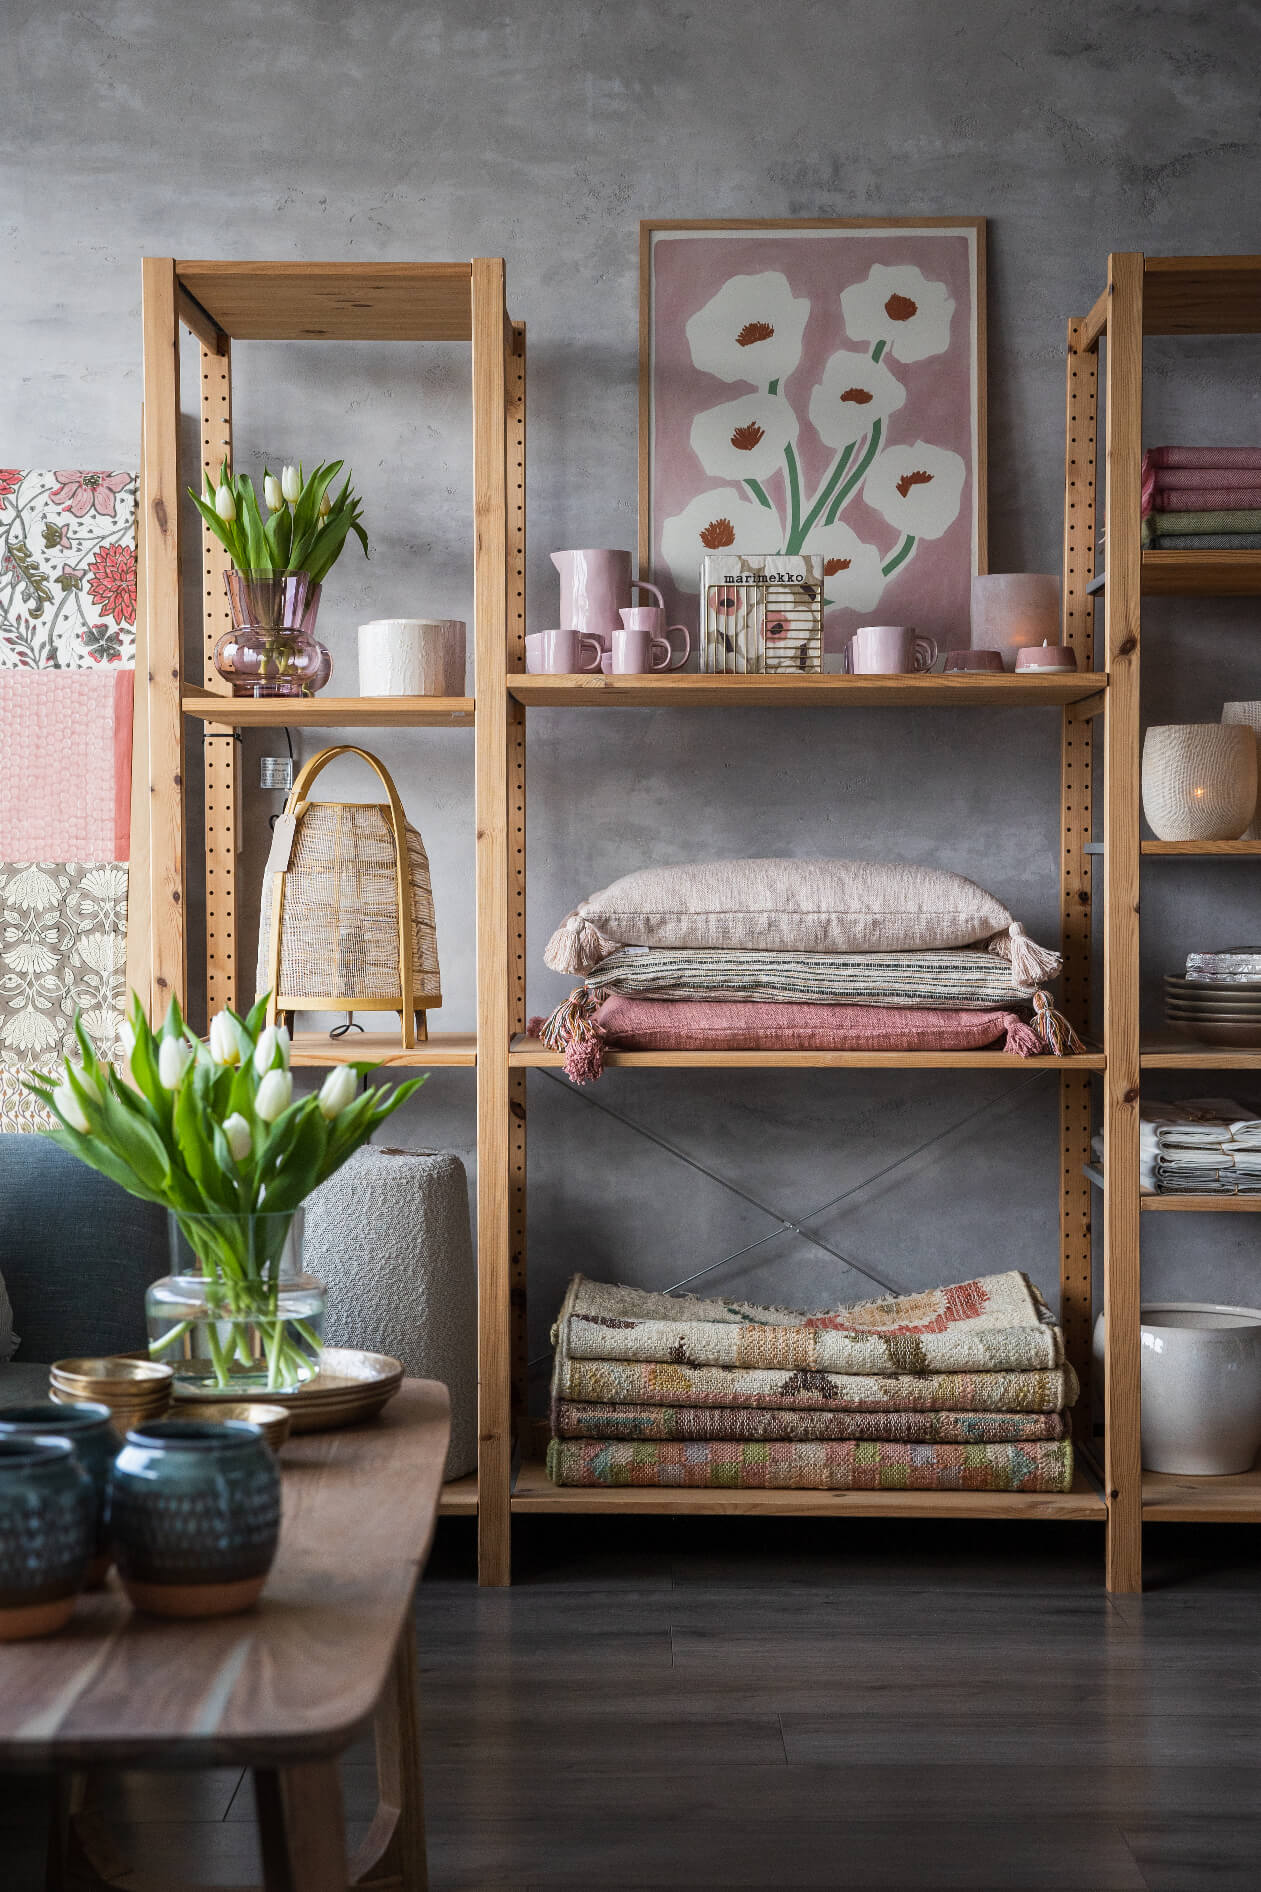 Floral print, cushions and interiors Wooden furniture and interiors inside Portstewart homewares store A Broader Picture